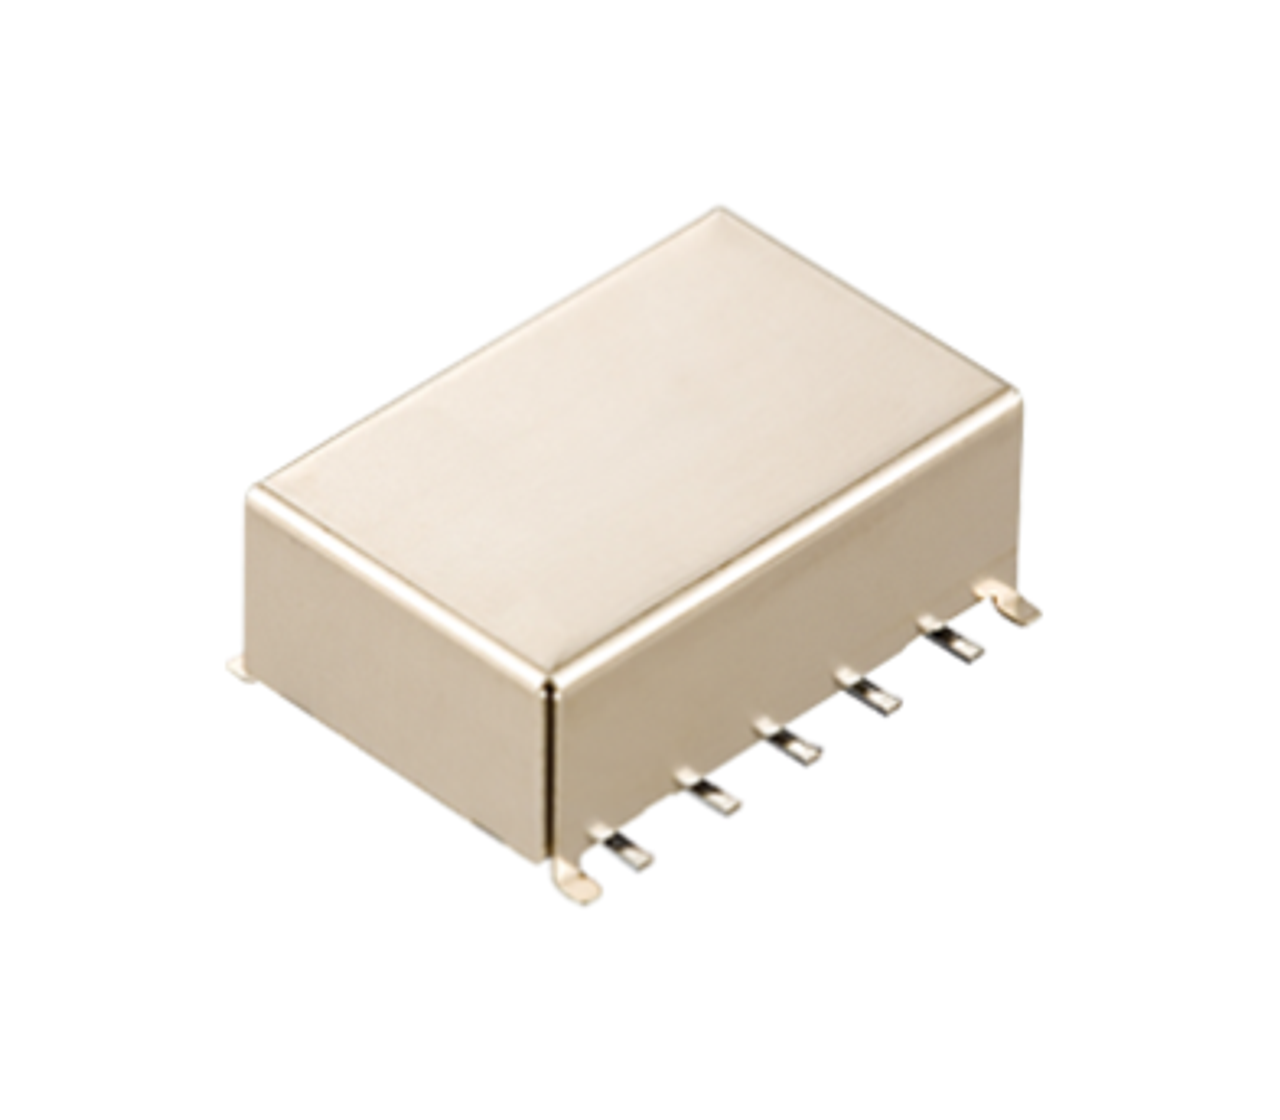 Panasonic Electric Works ARA220A12 High Frequency Relays